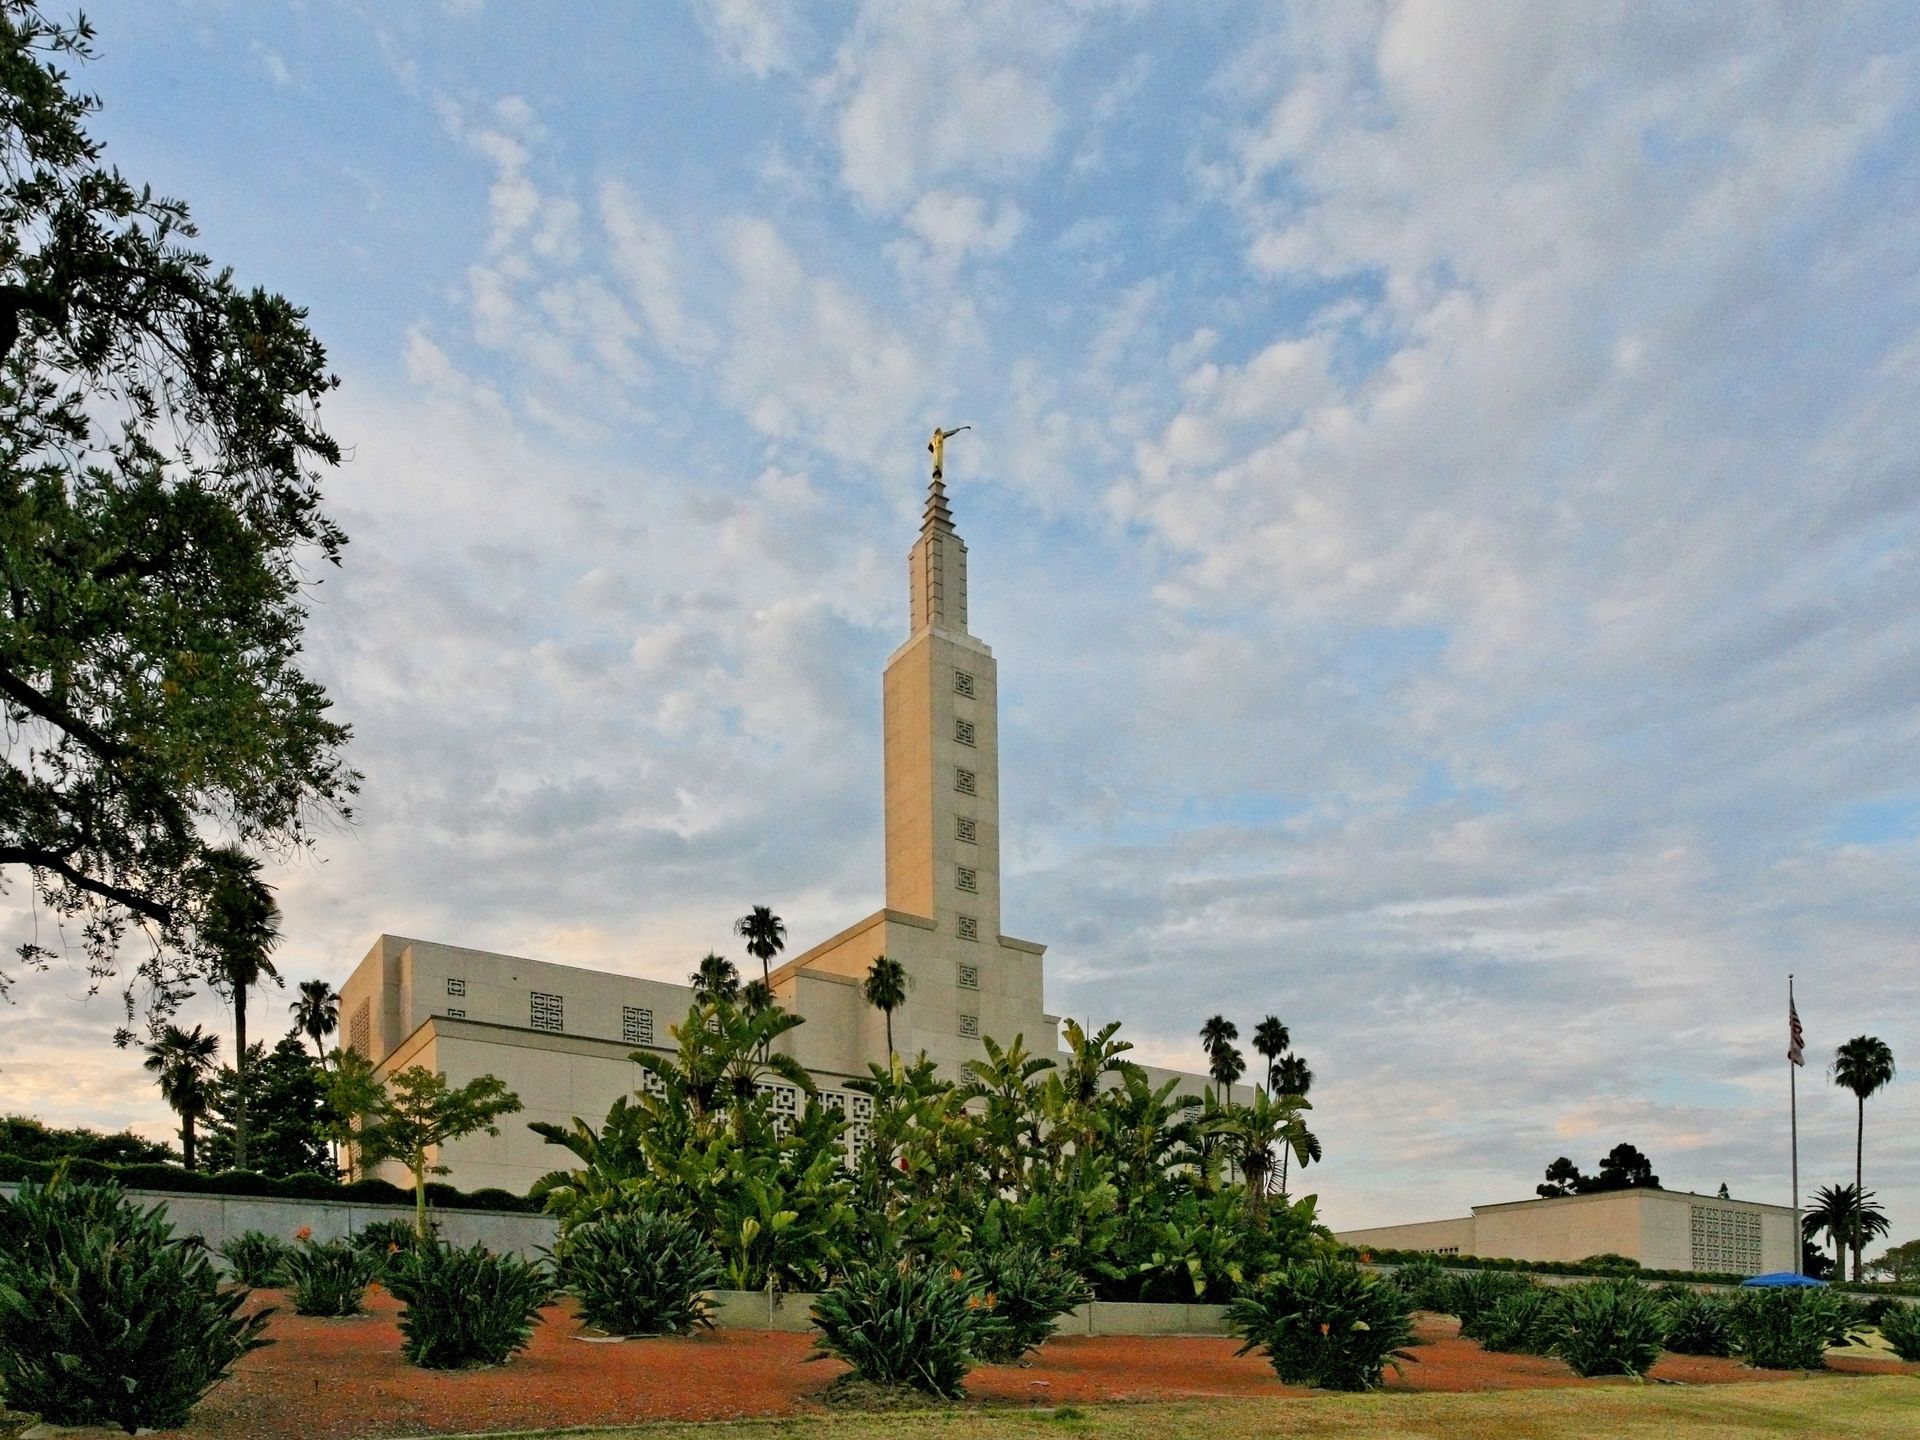 The Los Angeles California Temple exterior, including scenery.